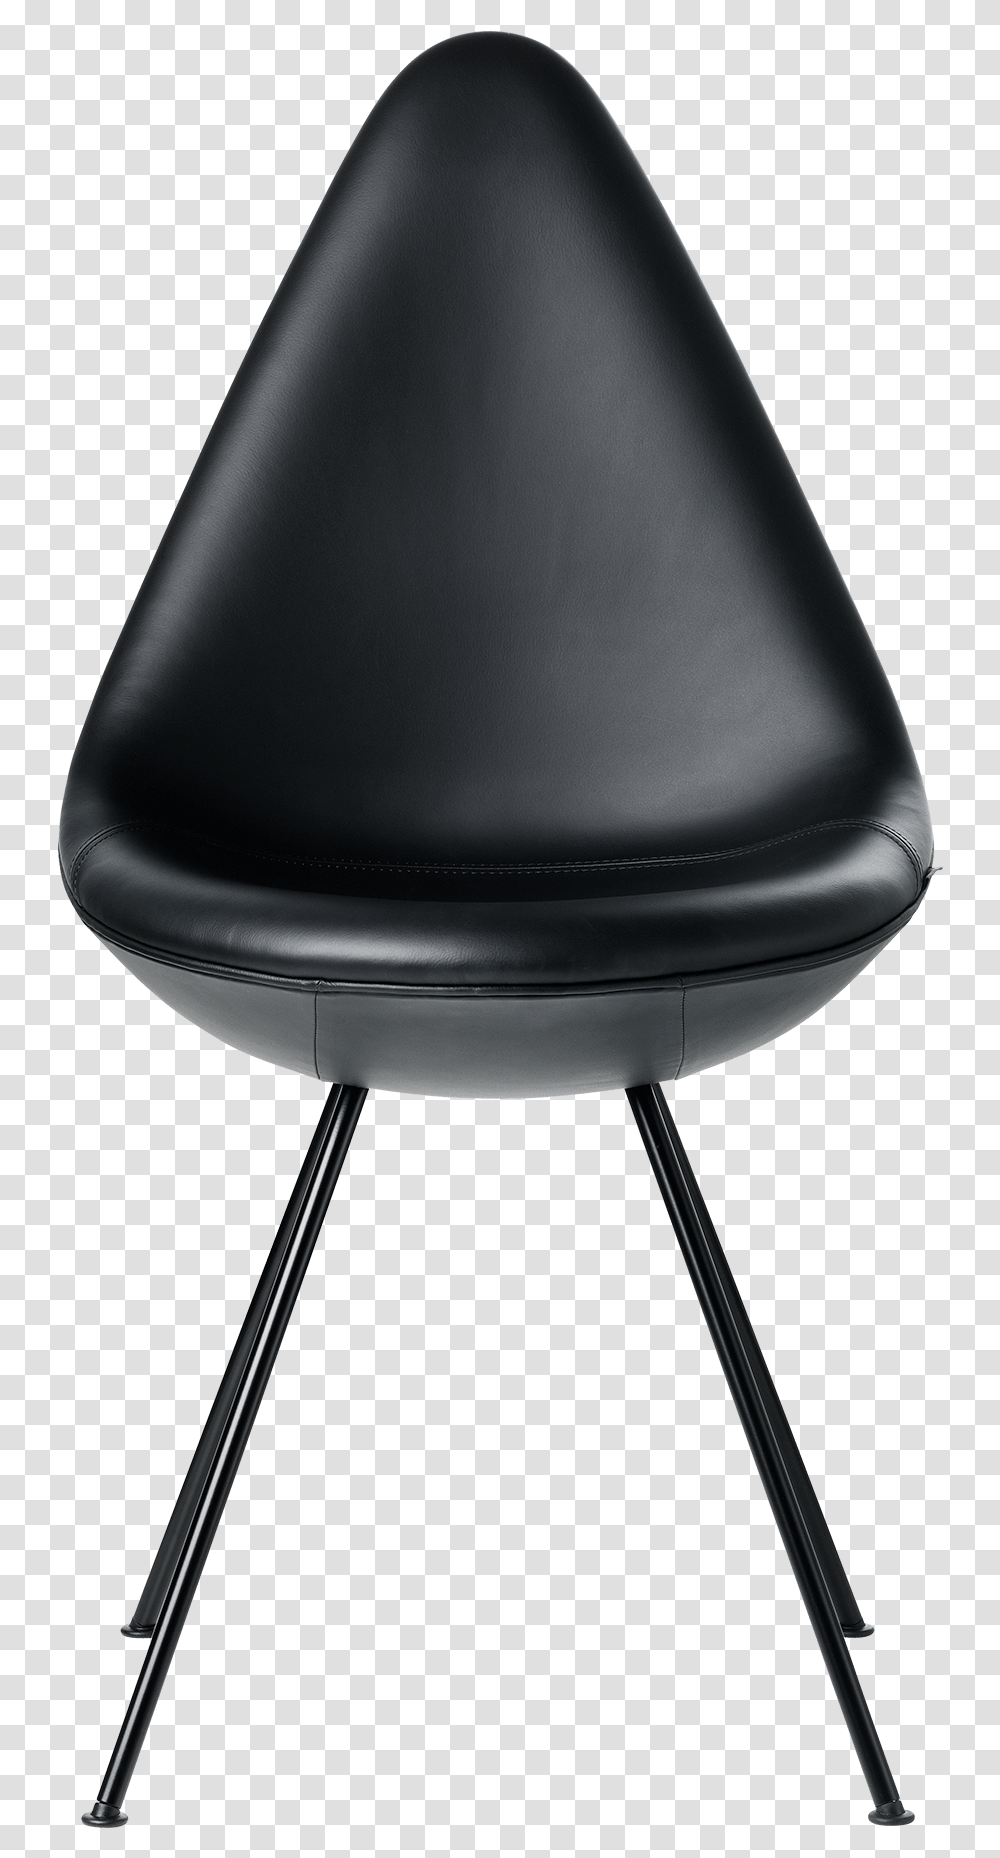 The Drop Chair Arne Jacobsen Black Basic Leather Lacquered Fritz Hansen Drop Chair, Furniture, Lamp, Armchair Transparent Png